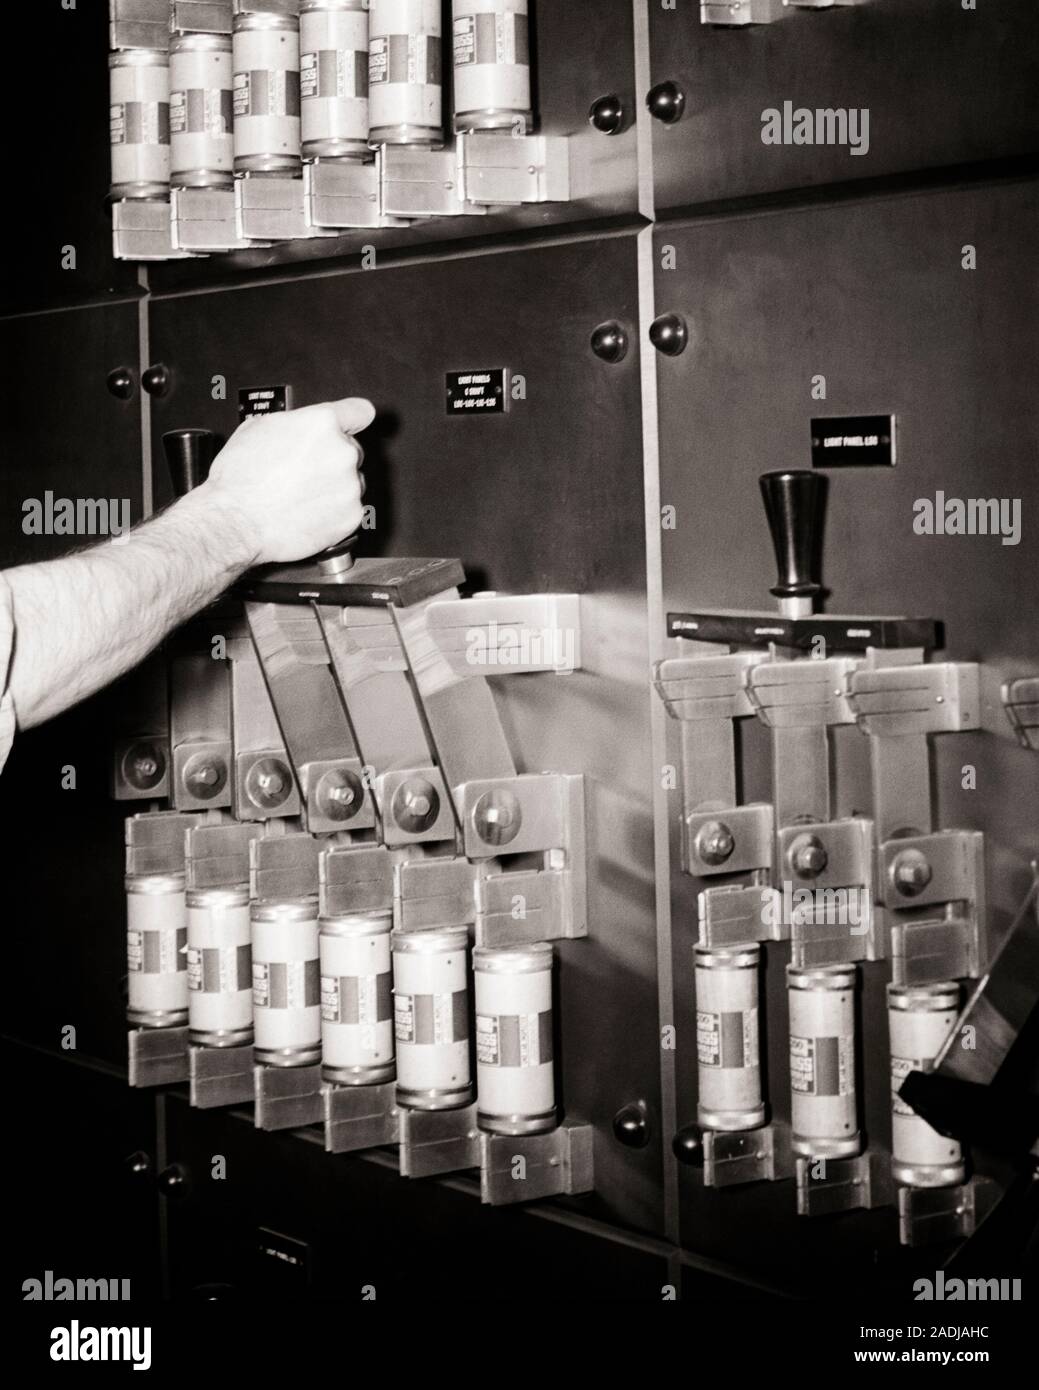 1940s 1950s INDUSTRIAL ELECTRIC CURRENT CONTROL PANEL WITH CARTRIDGE FUSES MALE HAND PULLING DOWN SWITCH ON MASTER CONTROL - s15640 HAR001 HARS PANEL SKILL OCCUPATION SKILLS POWERFUL ON MASTER OCCUPATIONS HIGH TECH CONCEPT CONNECTION CONCEPTUAL CURRENT SYMBOLIC CONCEPTS MID-ADULT MID-ADULT MAN BLACK AND WHITE CAUCASIAN ETHNICITY GRID HANDS ONLY HAR001 OLD FASHIONED REPRESENTATION Stock Photo